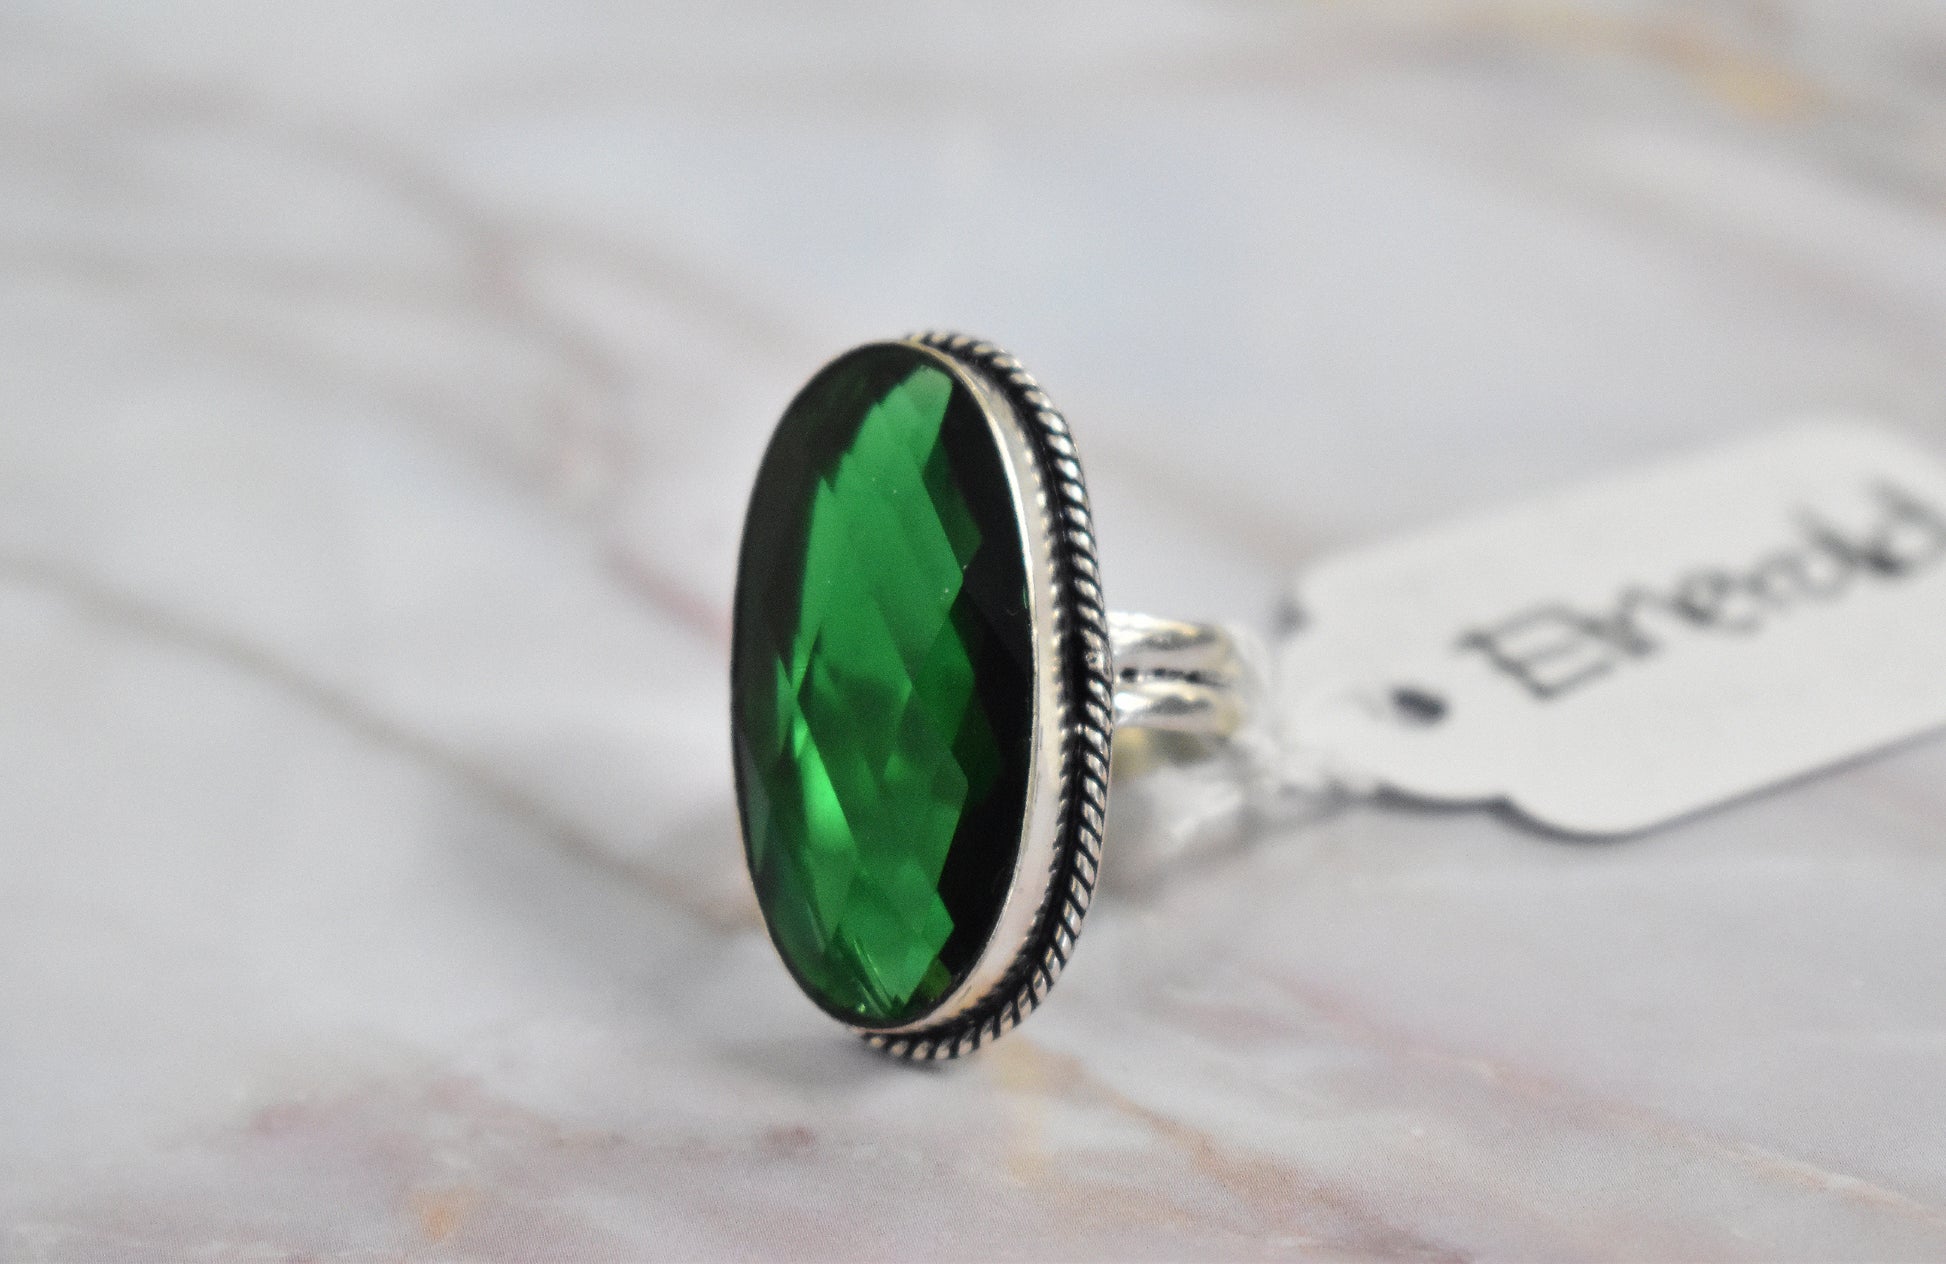 stones-of-transformation - Emerald Ring (Size 8) - Stones of Transformation - 